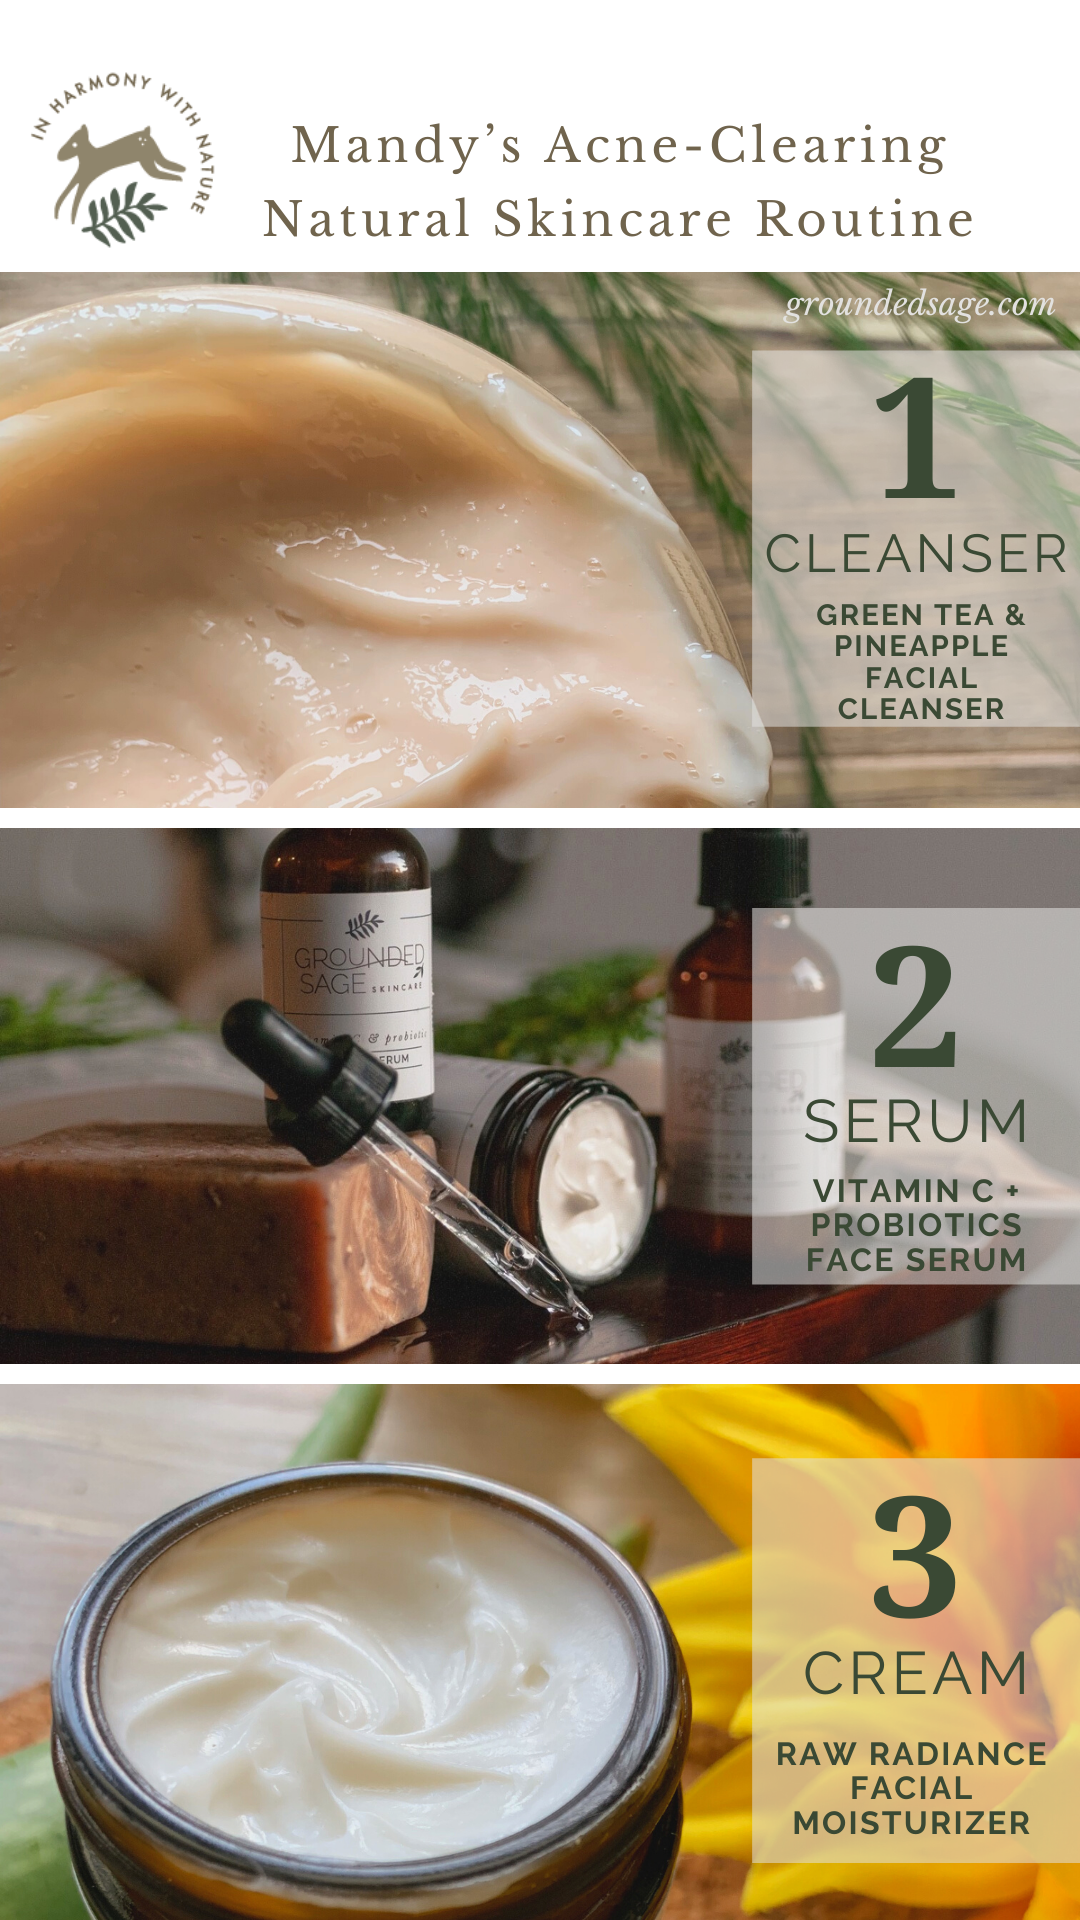 Healthy, natural skin care routine products for acne morning and night